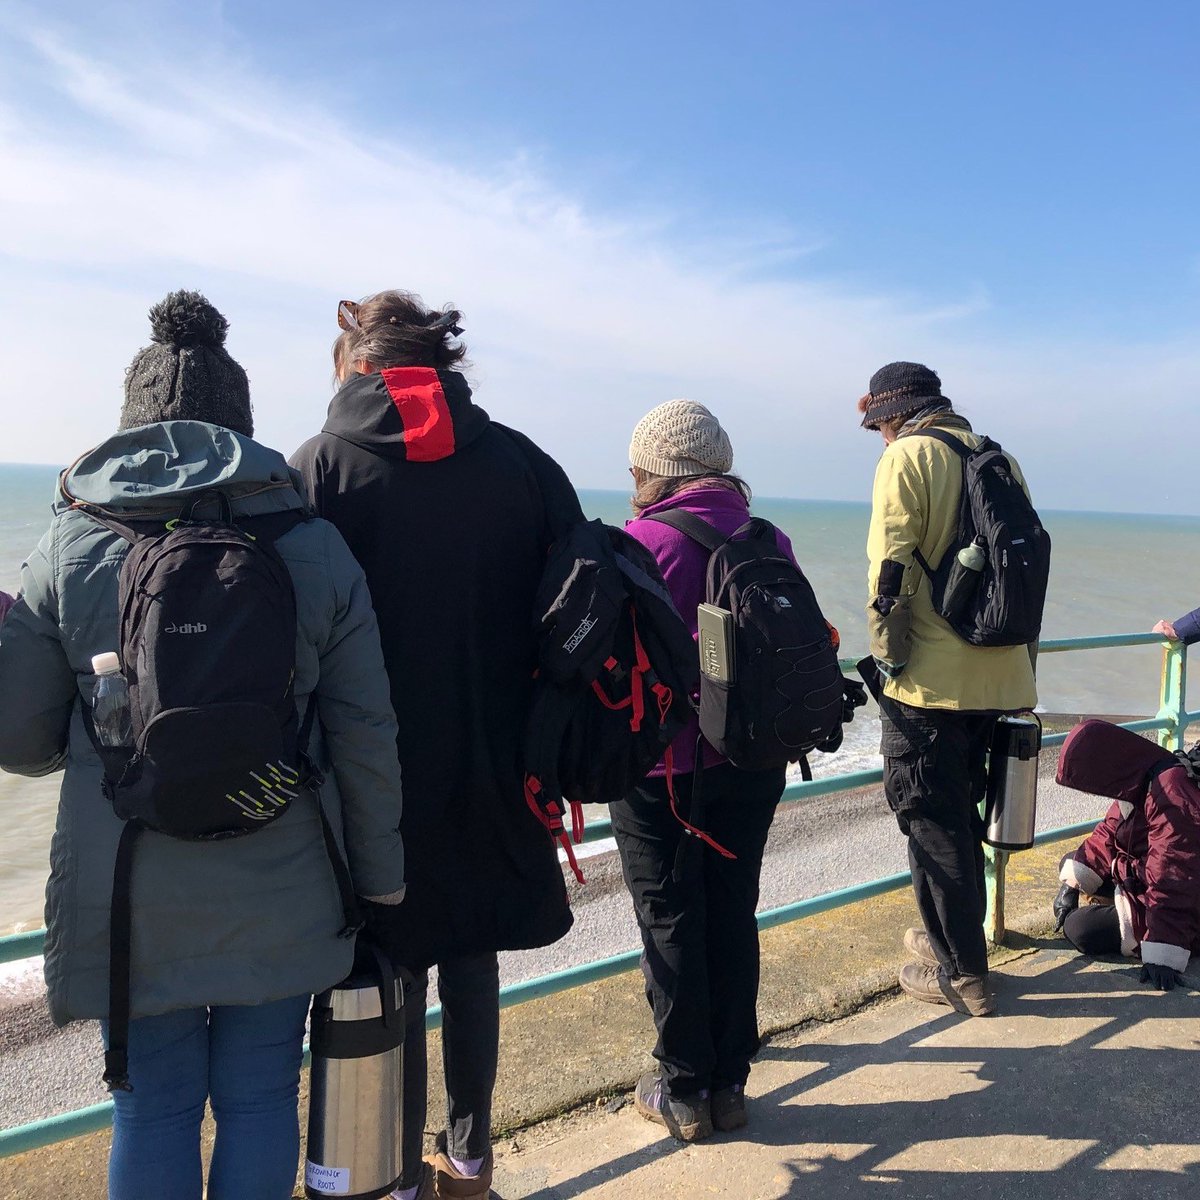 Our 8 week #wellbeing in nature course is recruiting now. Taster session on Friday 24th. Apply if you: - live in West #Sussex - have a #mentalhealth condition - would benefit from #natureconnection. bhfood.org.uk/events/growing… #changingchalk @southdownseastnt @heritagefunduk